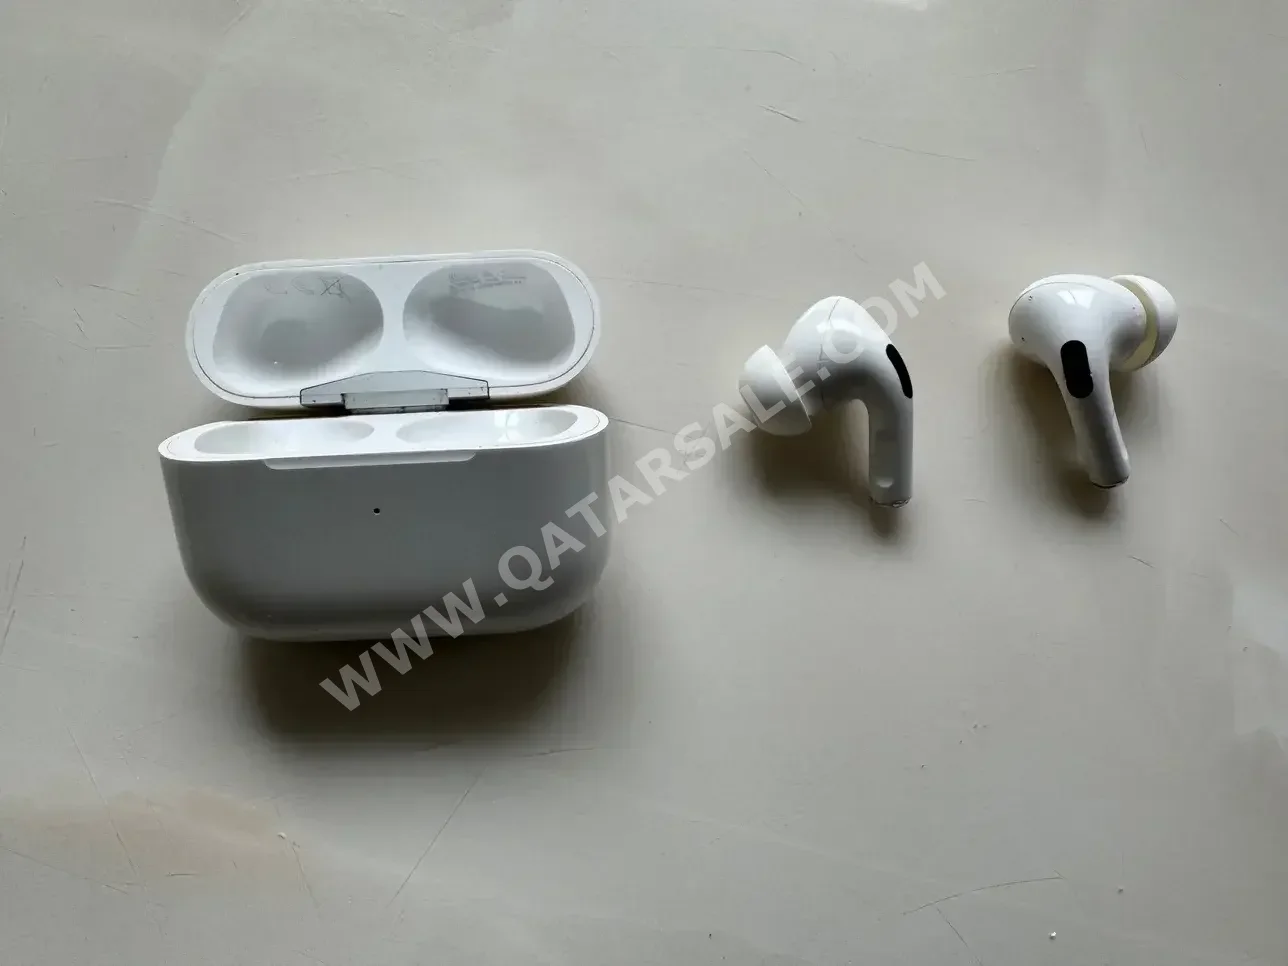 Headphones & Earbuds,Airpods Apple  Aipod Pro 1st Gen  White  Airpods